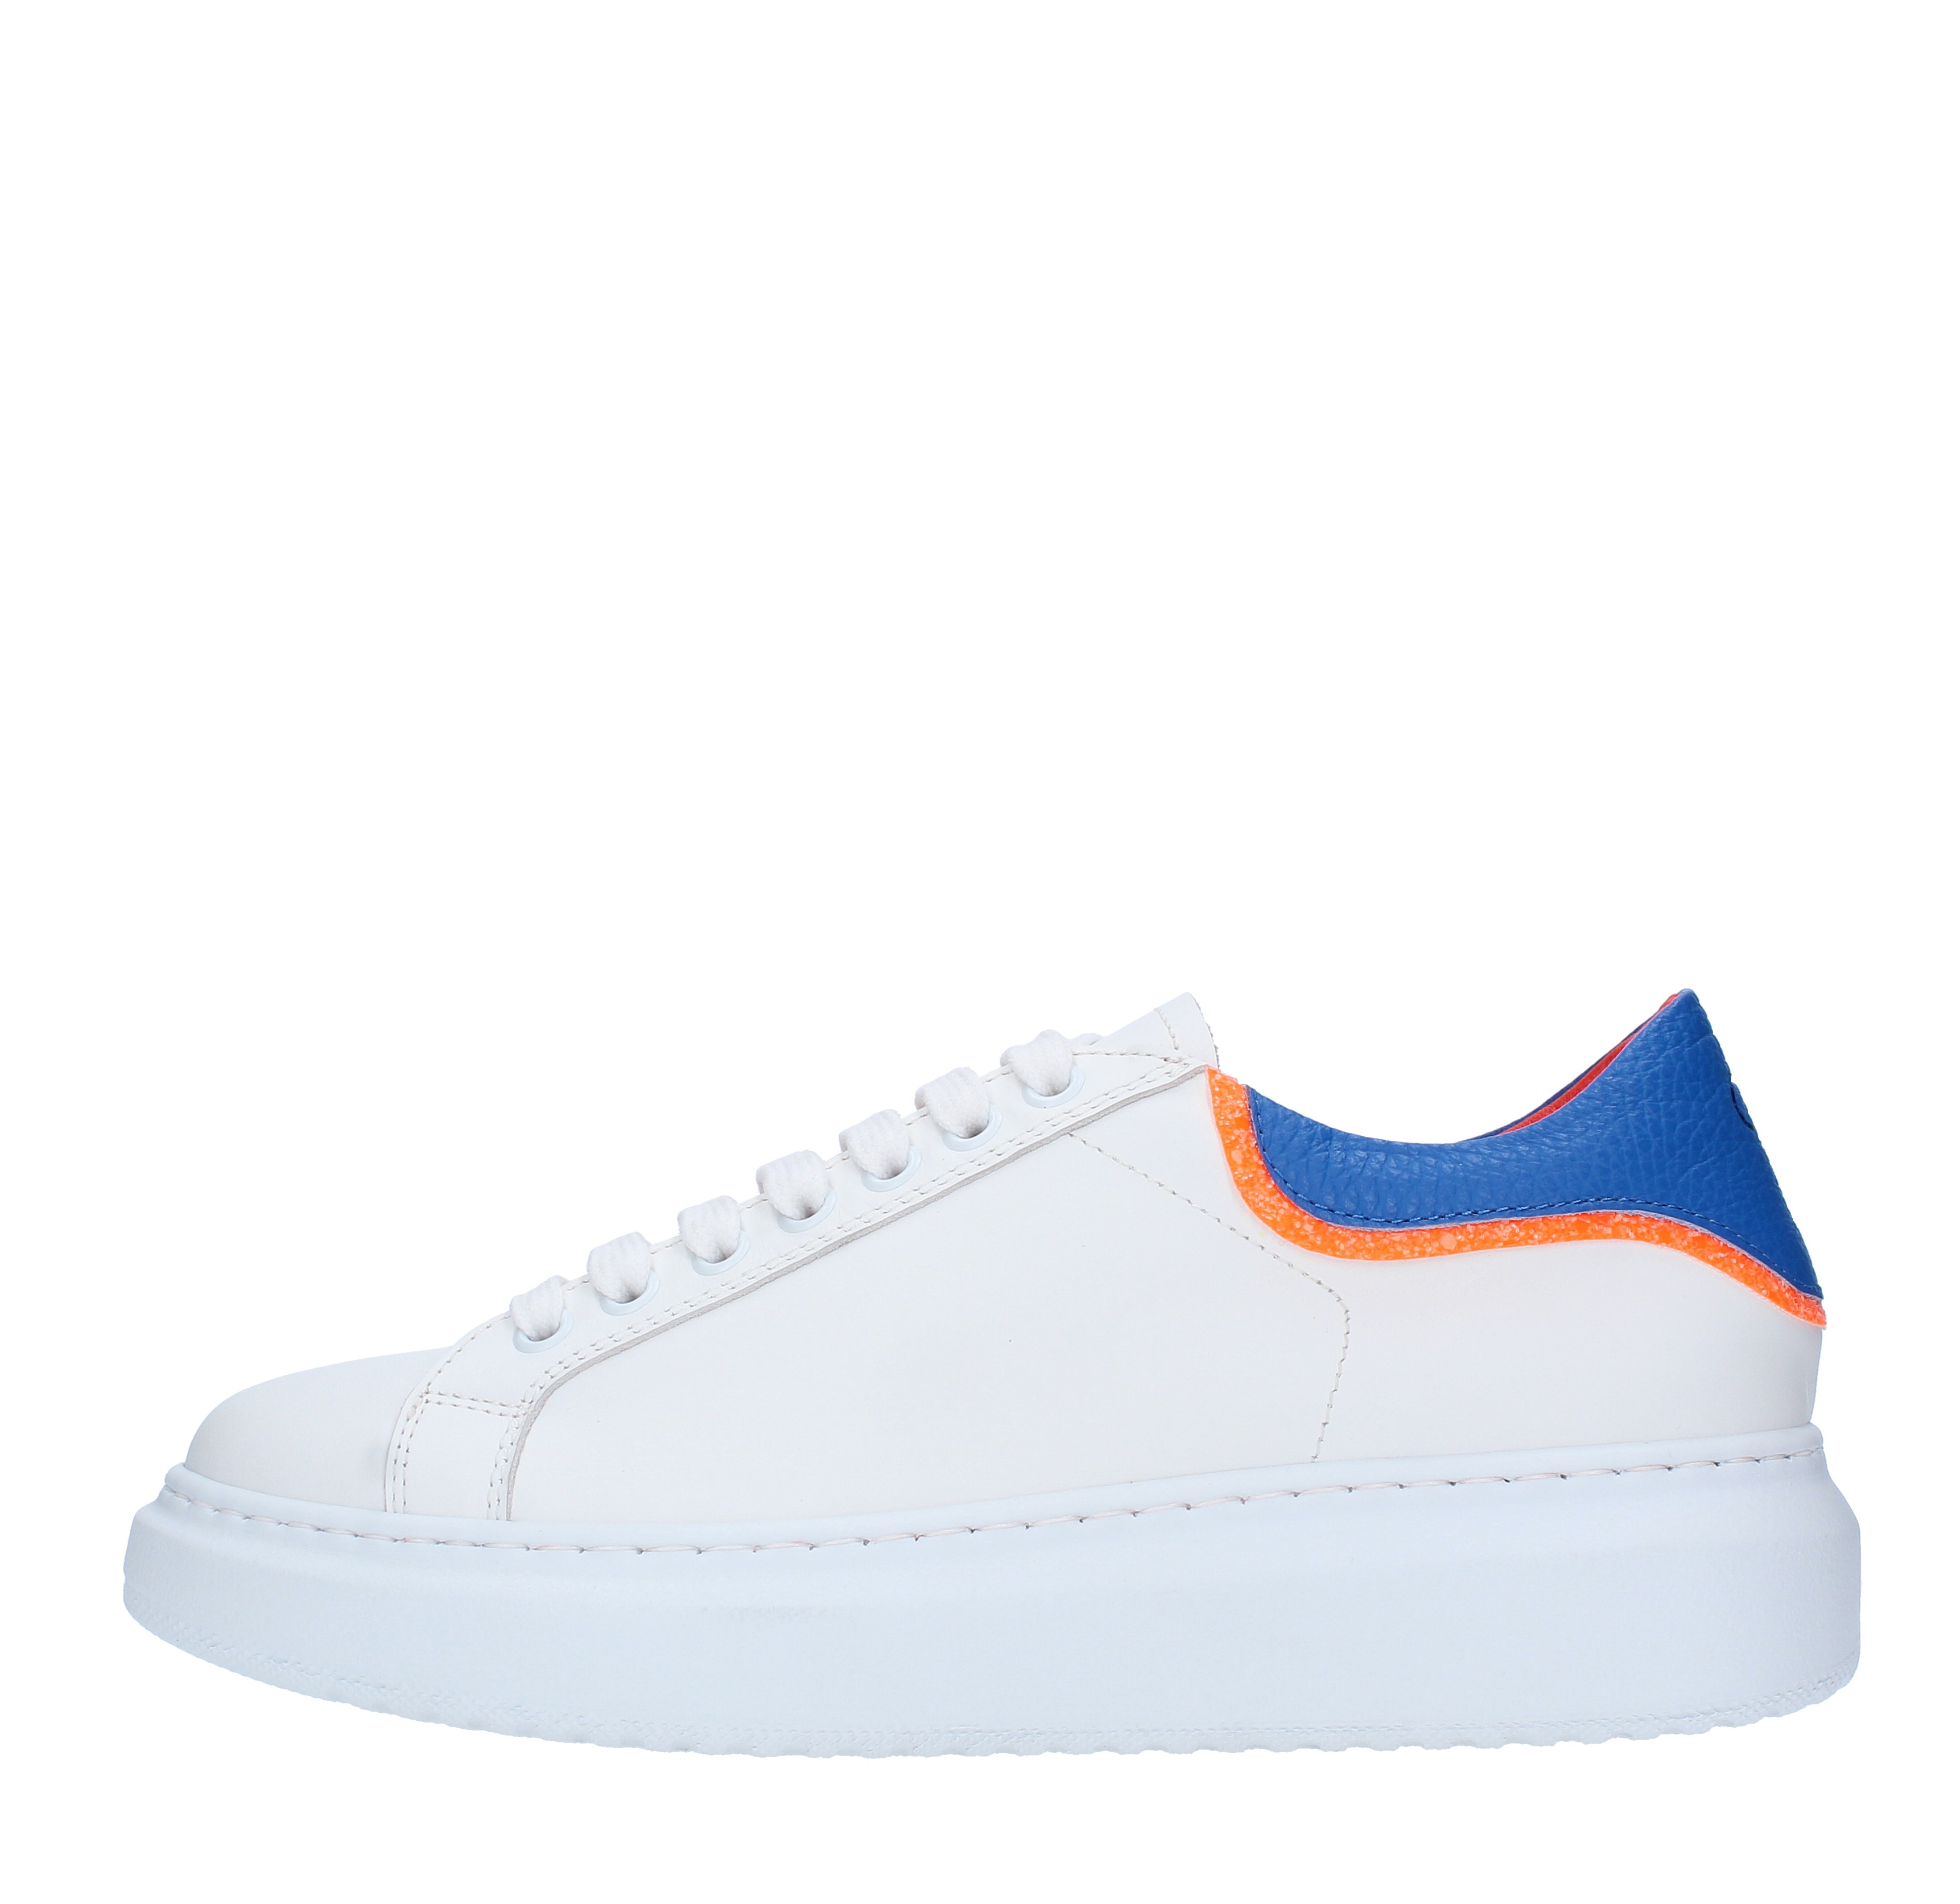 Sneakers in pelle - LEMARE' - Ginevra calzature